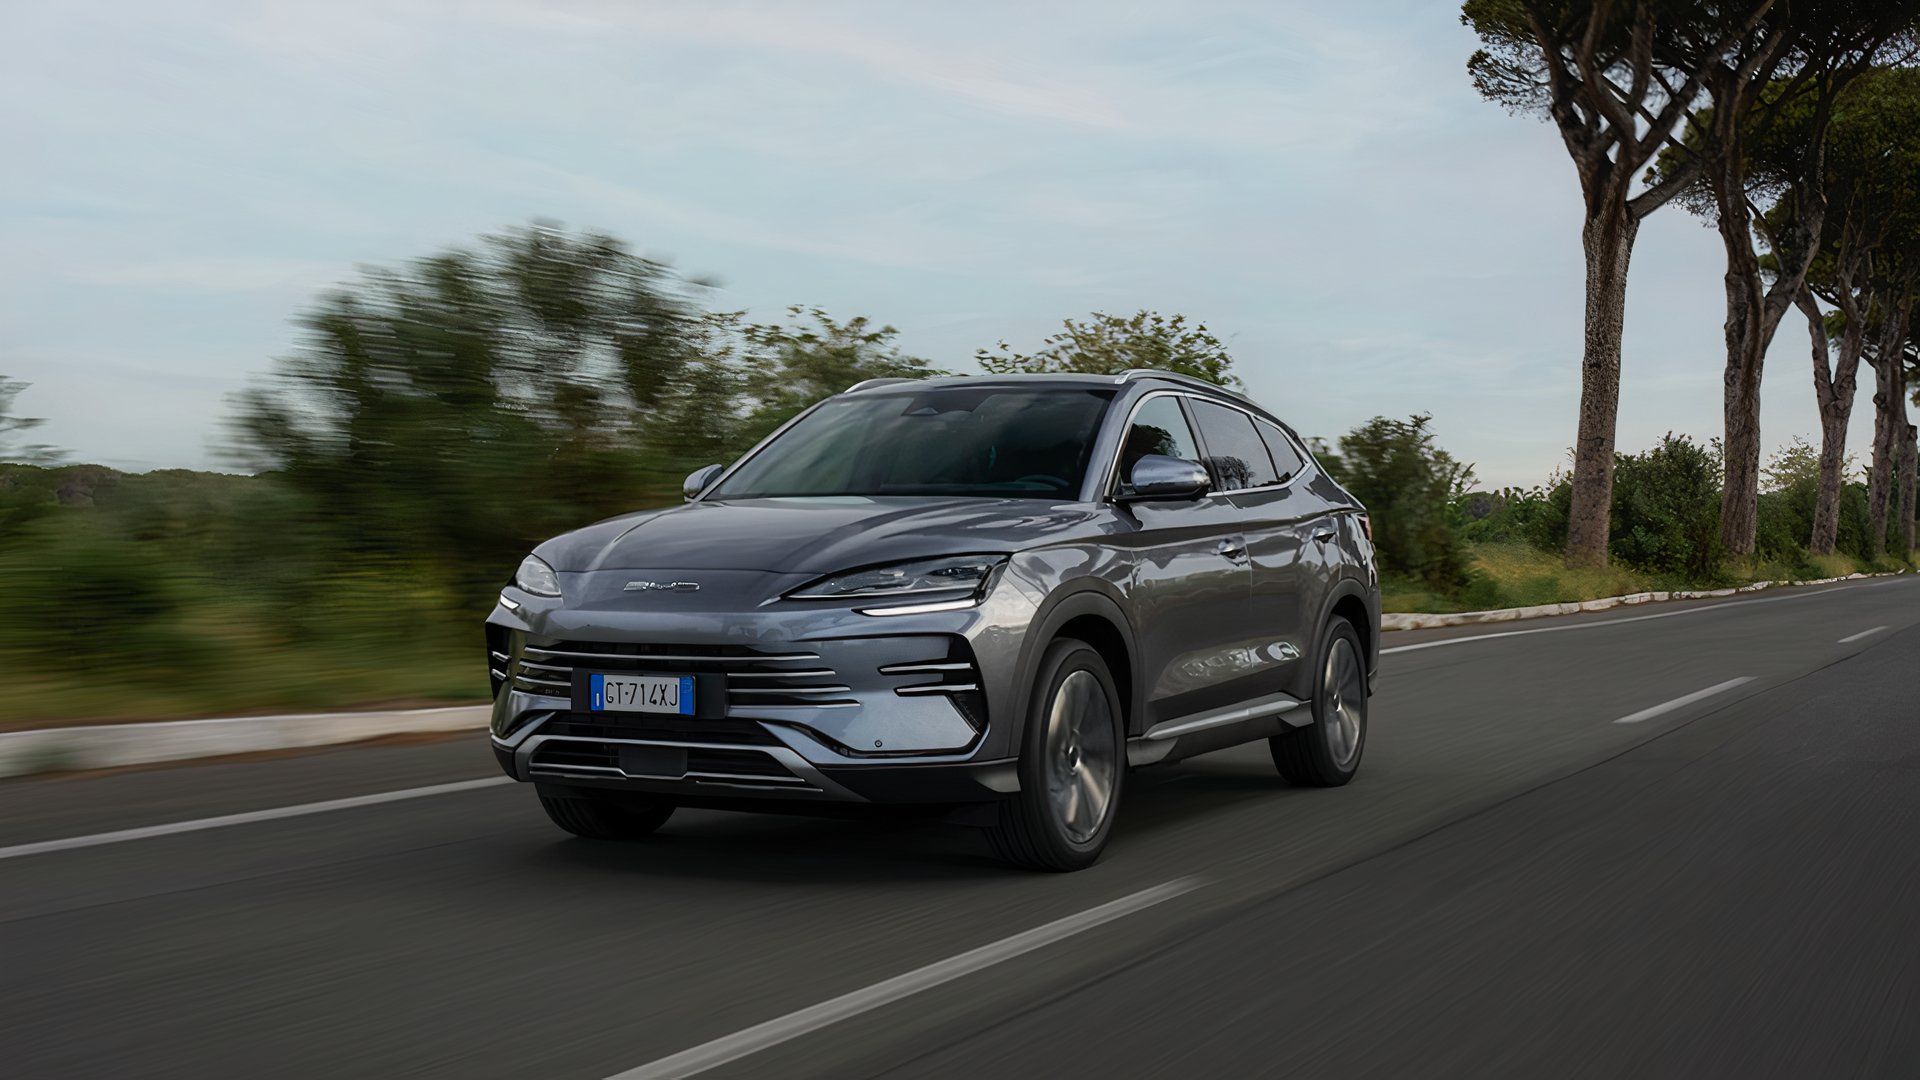 New Plug-In Hybrid SUV From China Claims To Have 684 Miles Of Range